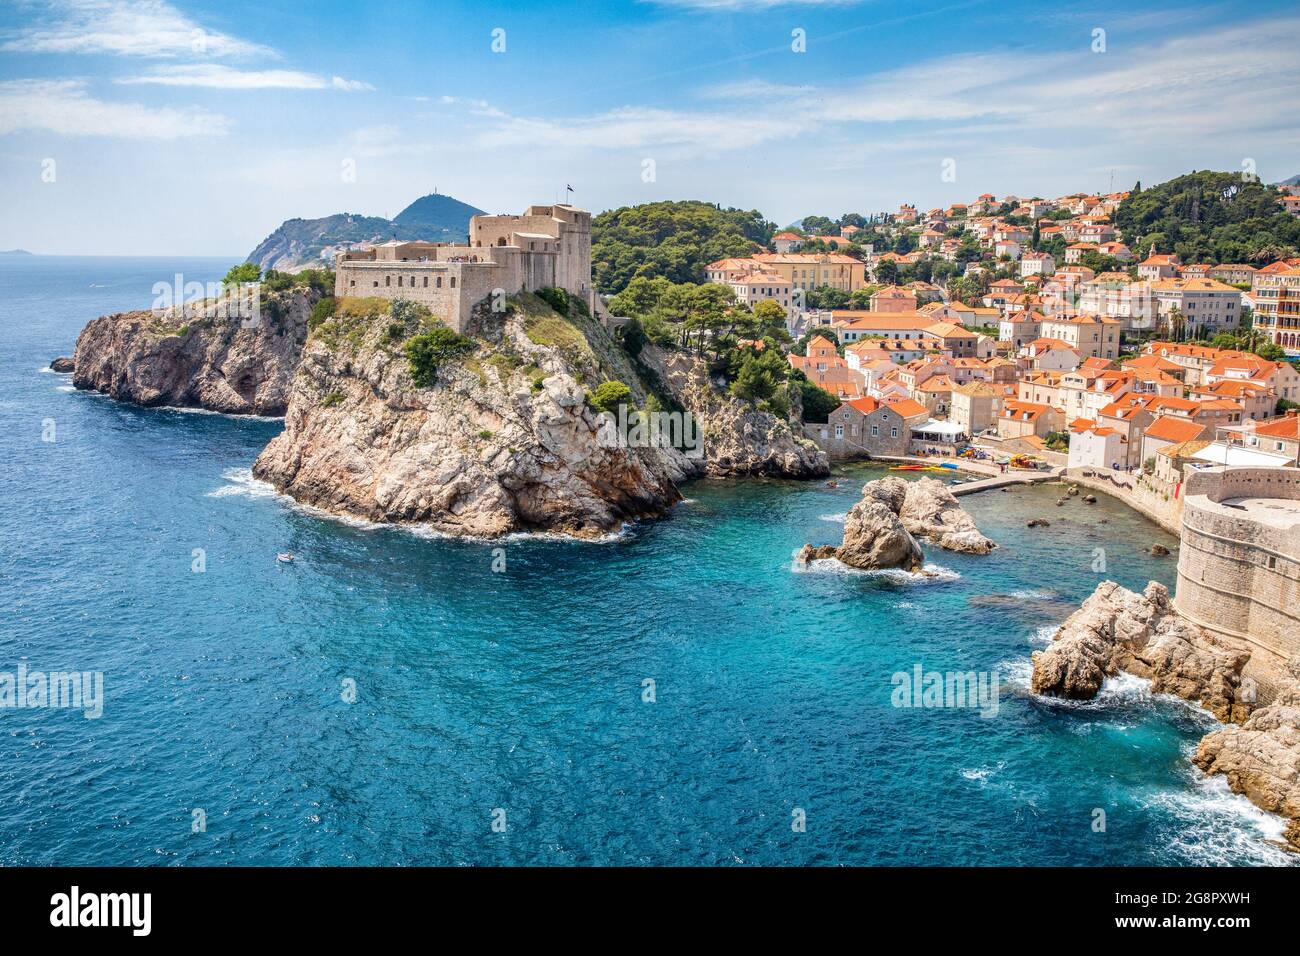 Lovrijenac or St Lawrence Fortress guarding the sheltered cove and northern seaward approach to Dubrovnik old town on the Dalmatian Coast Croatia Stock Photo